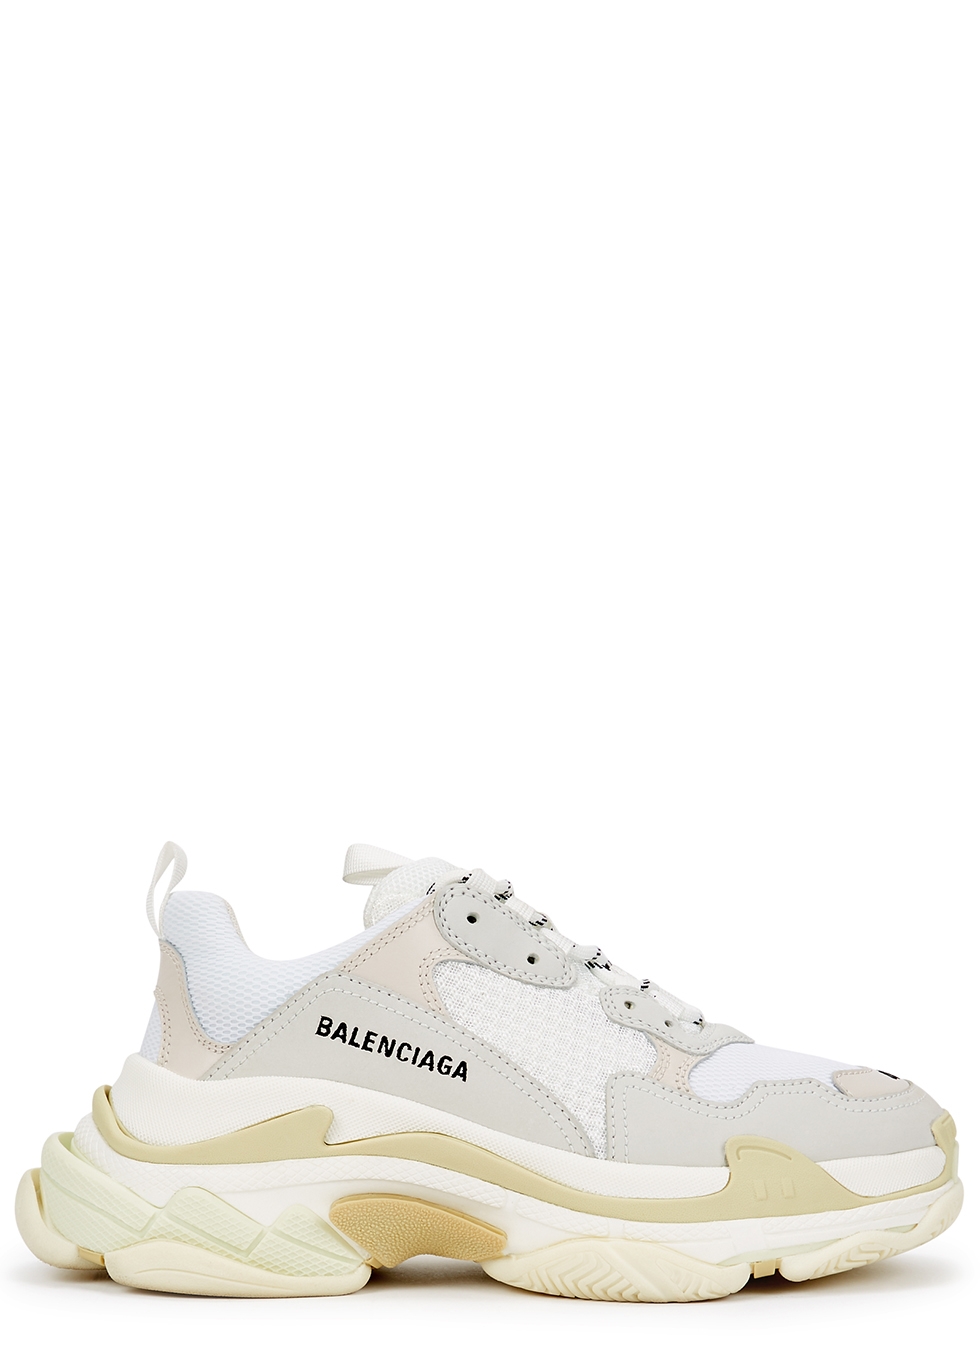 Balenciaga Leather Triple S Air Nylon Sneakers With Logo in